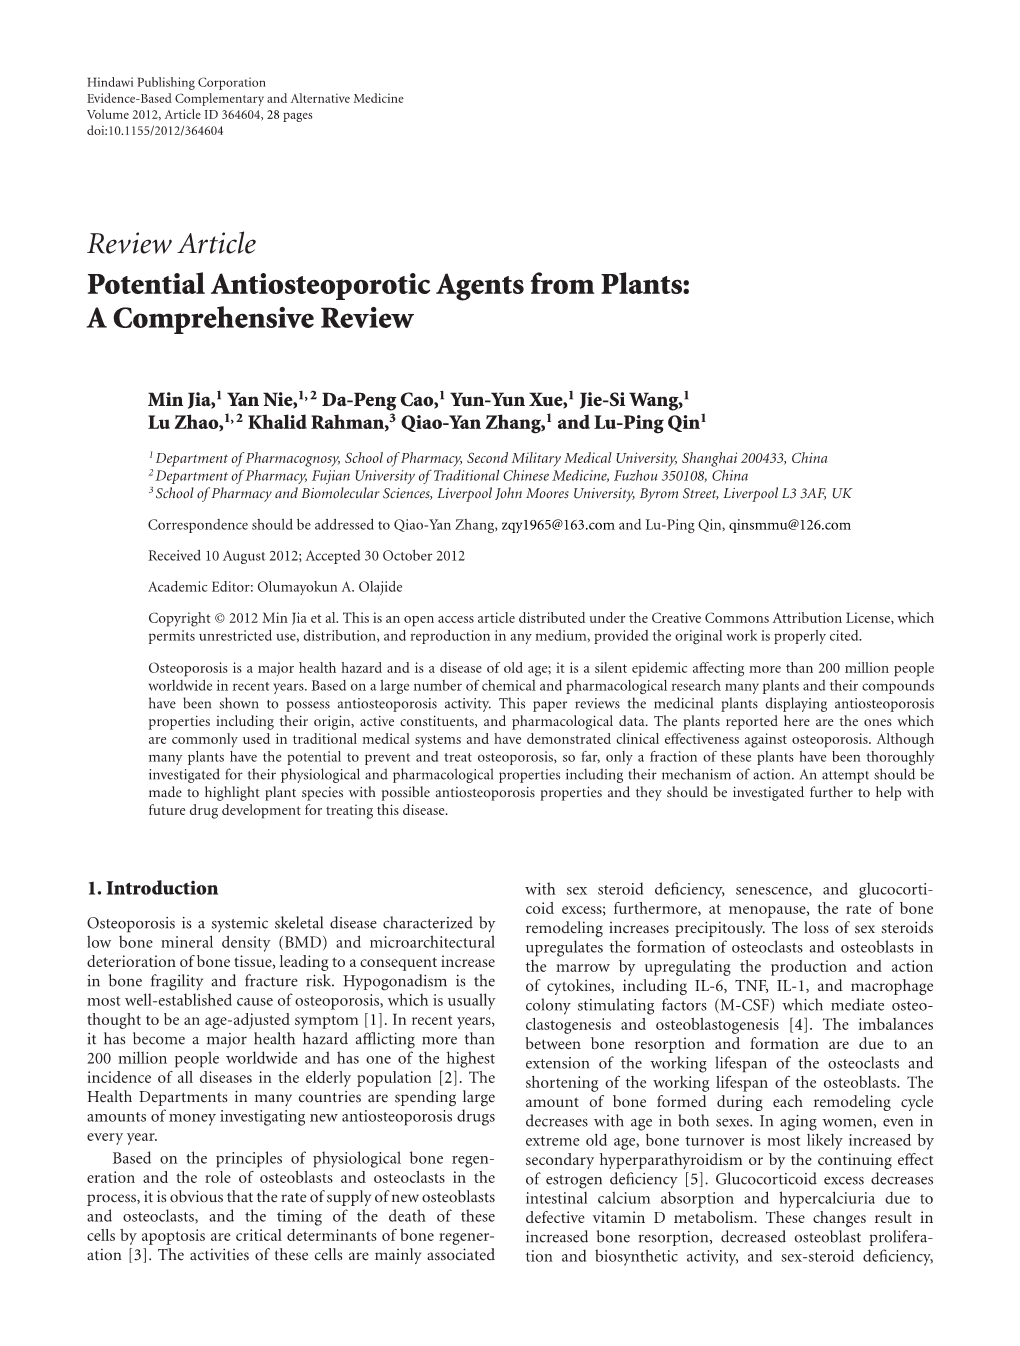 Review Article Potential Antiosteoporotic Agents from Plants: Acomprehensivereview